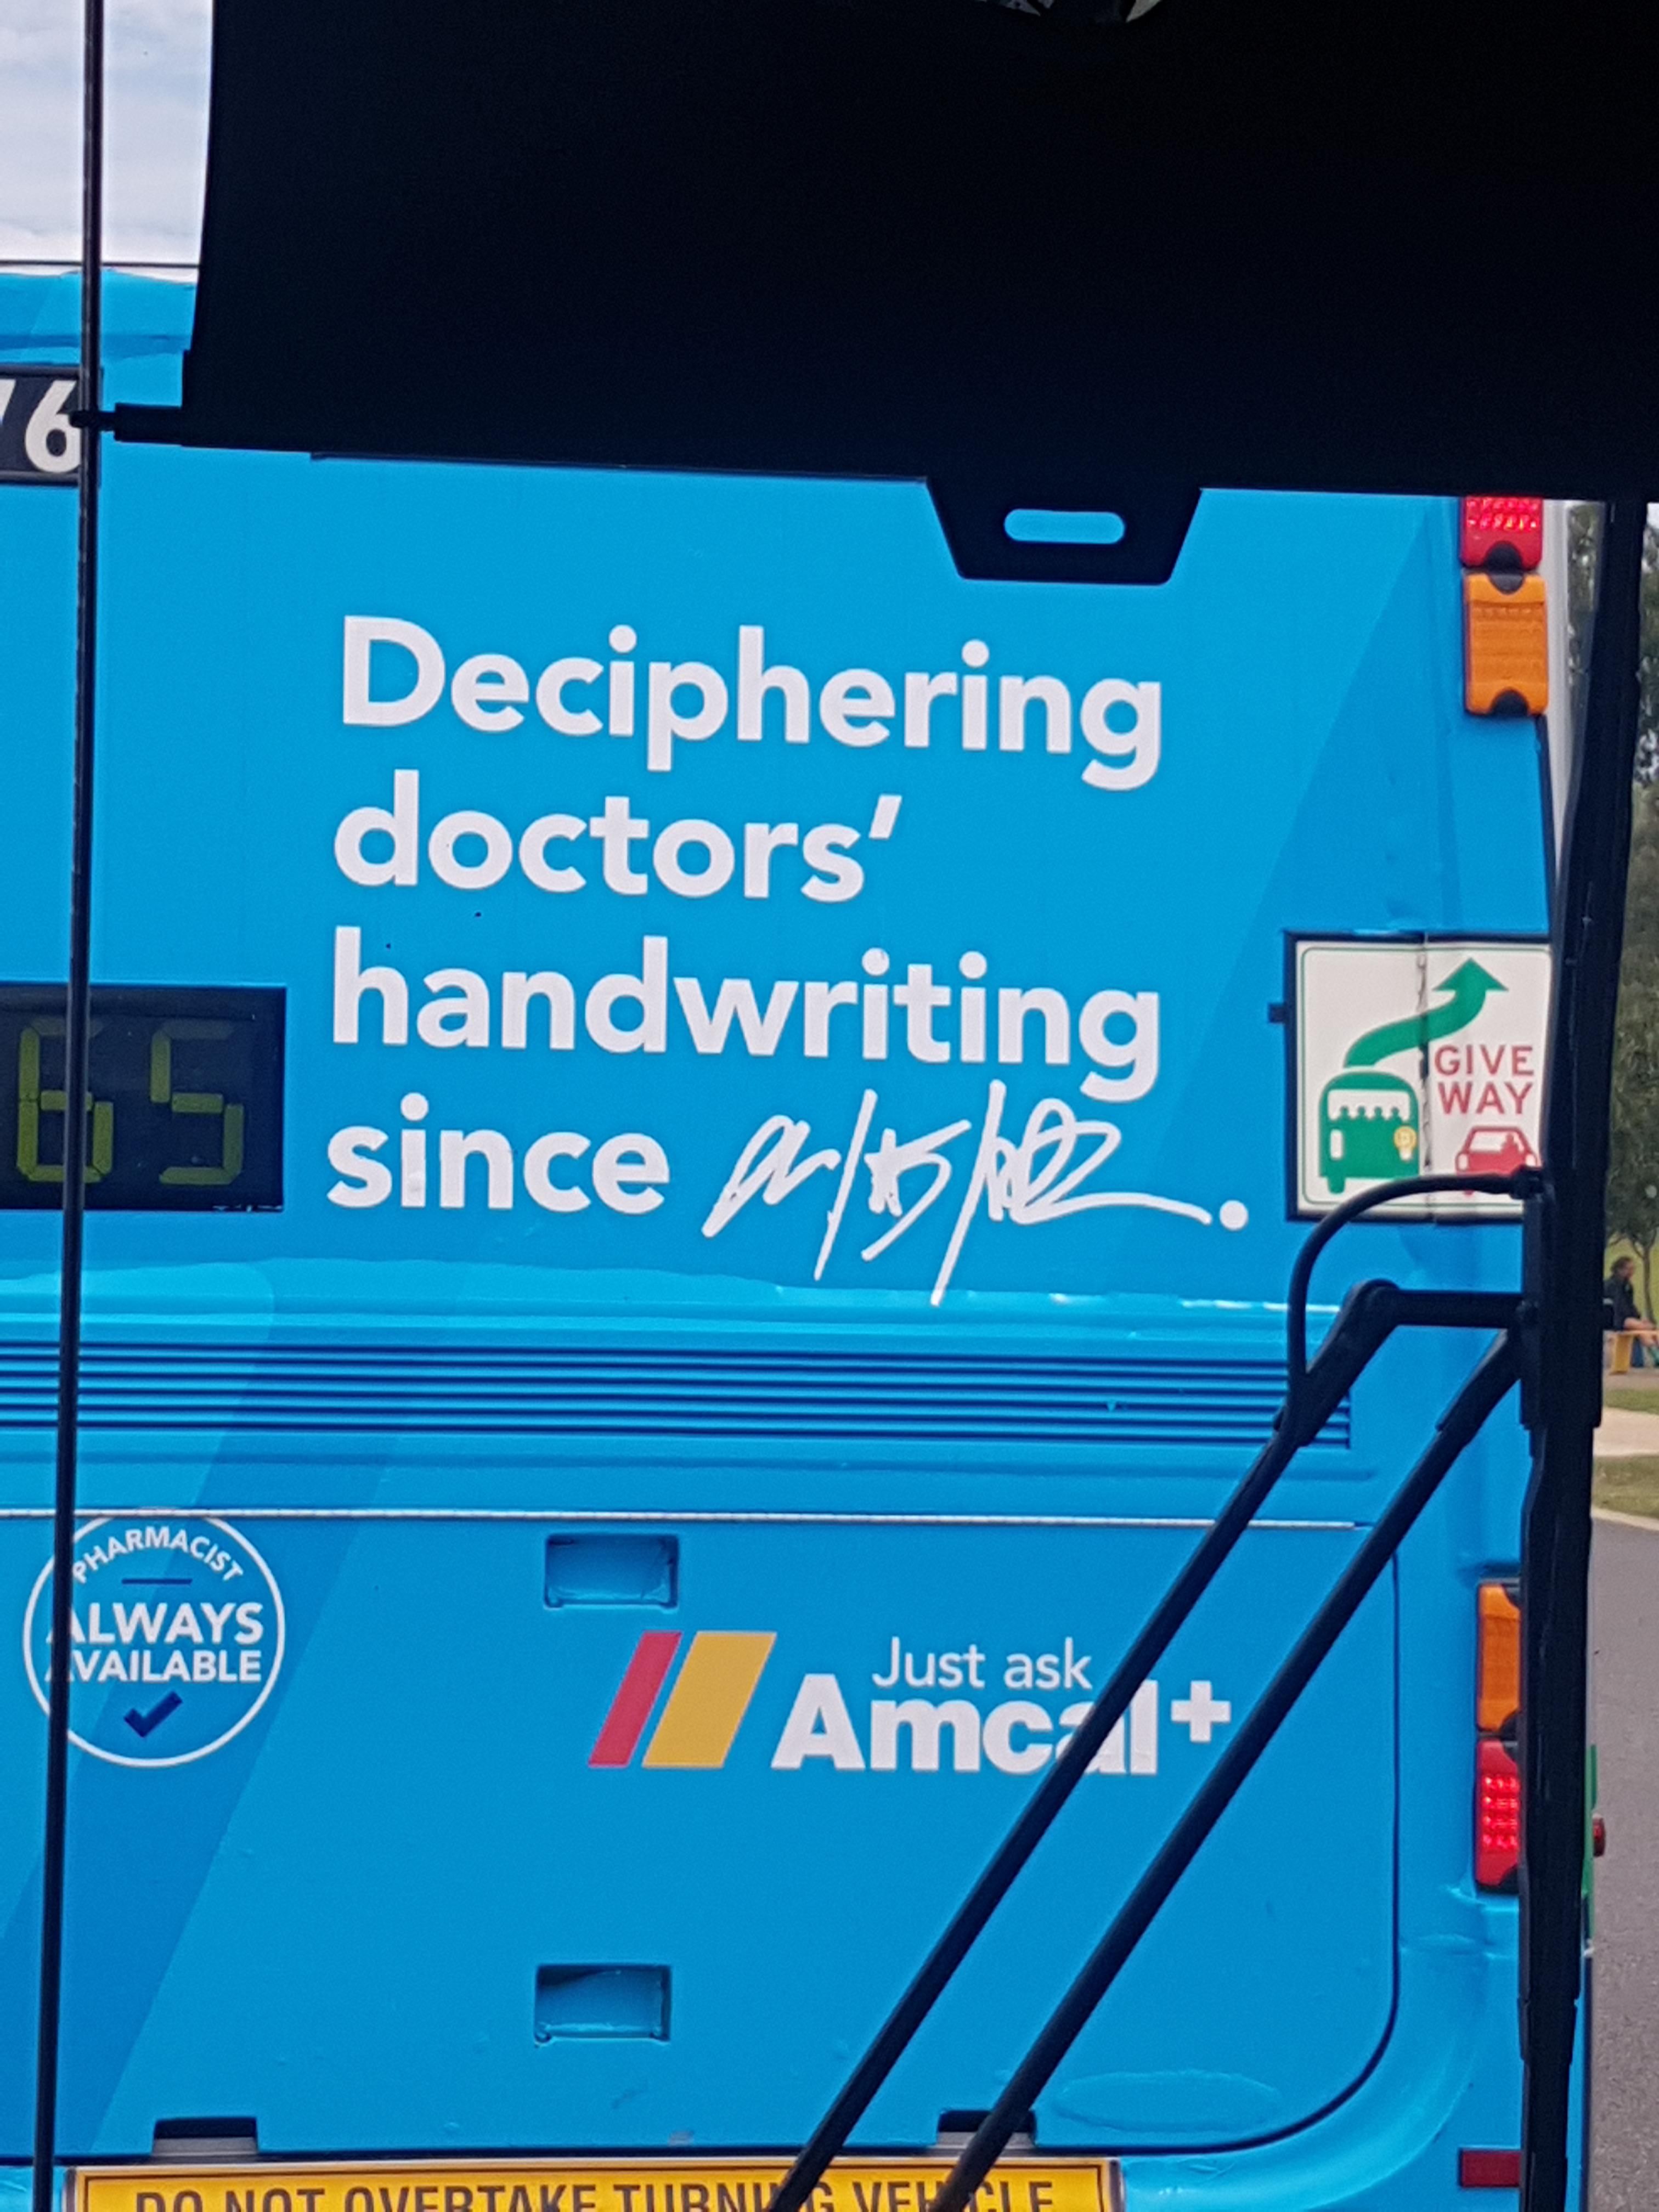 An advertisement on the back of a bus